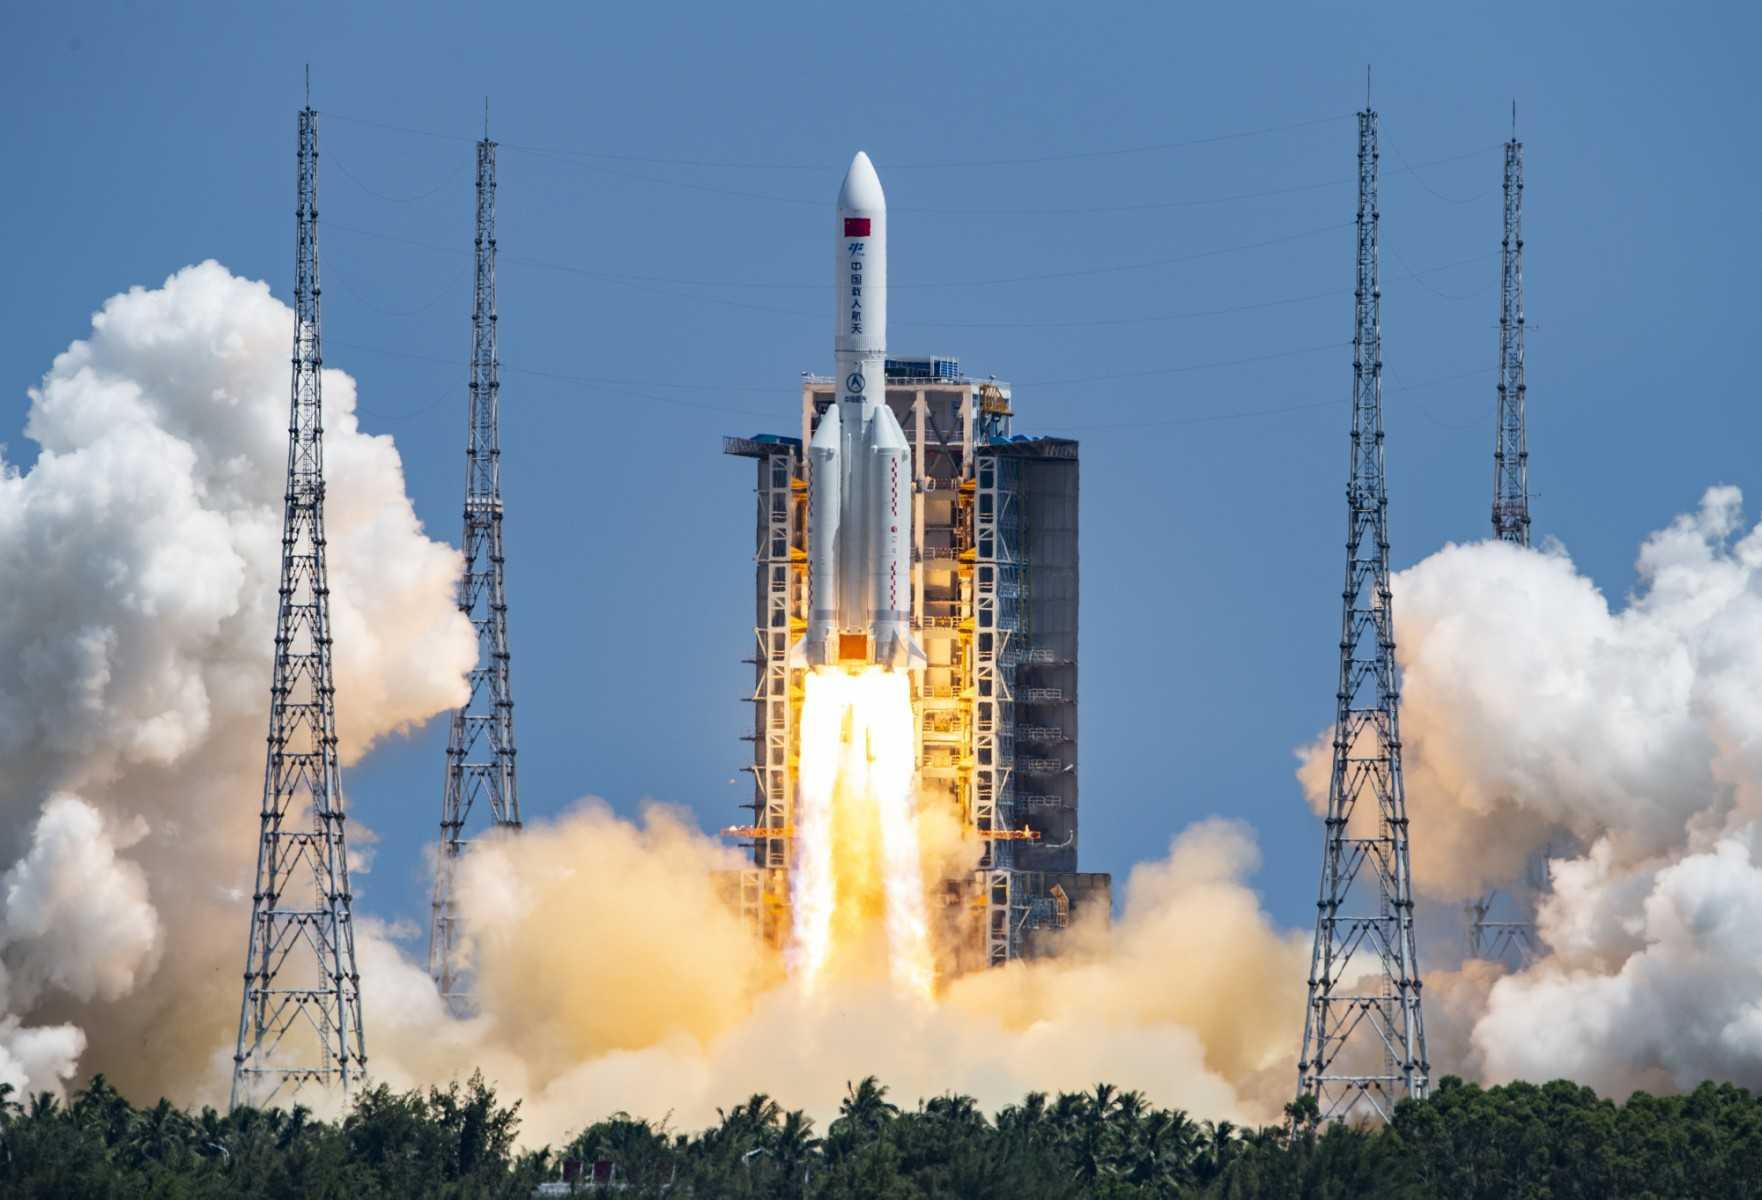 The rocket carrying China’s second module for its Tiangong space station lifts off from Wenchang spaceport in southern China on July 24. Photo: AFP